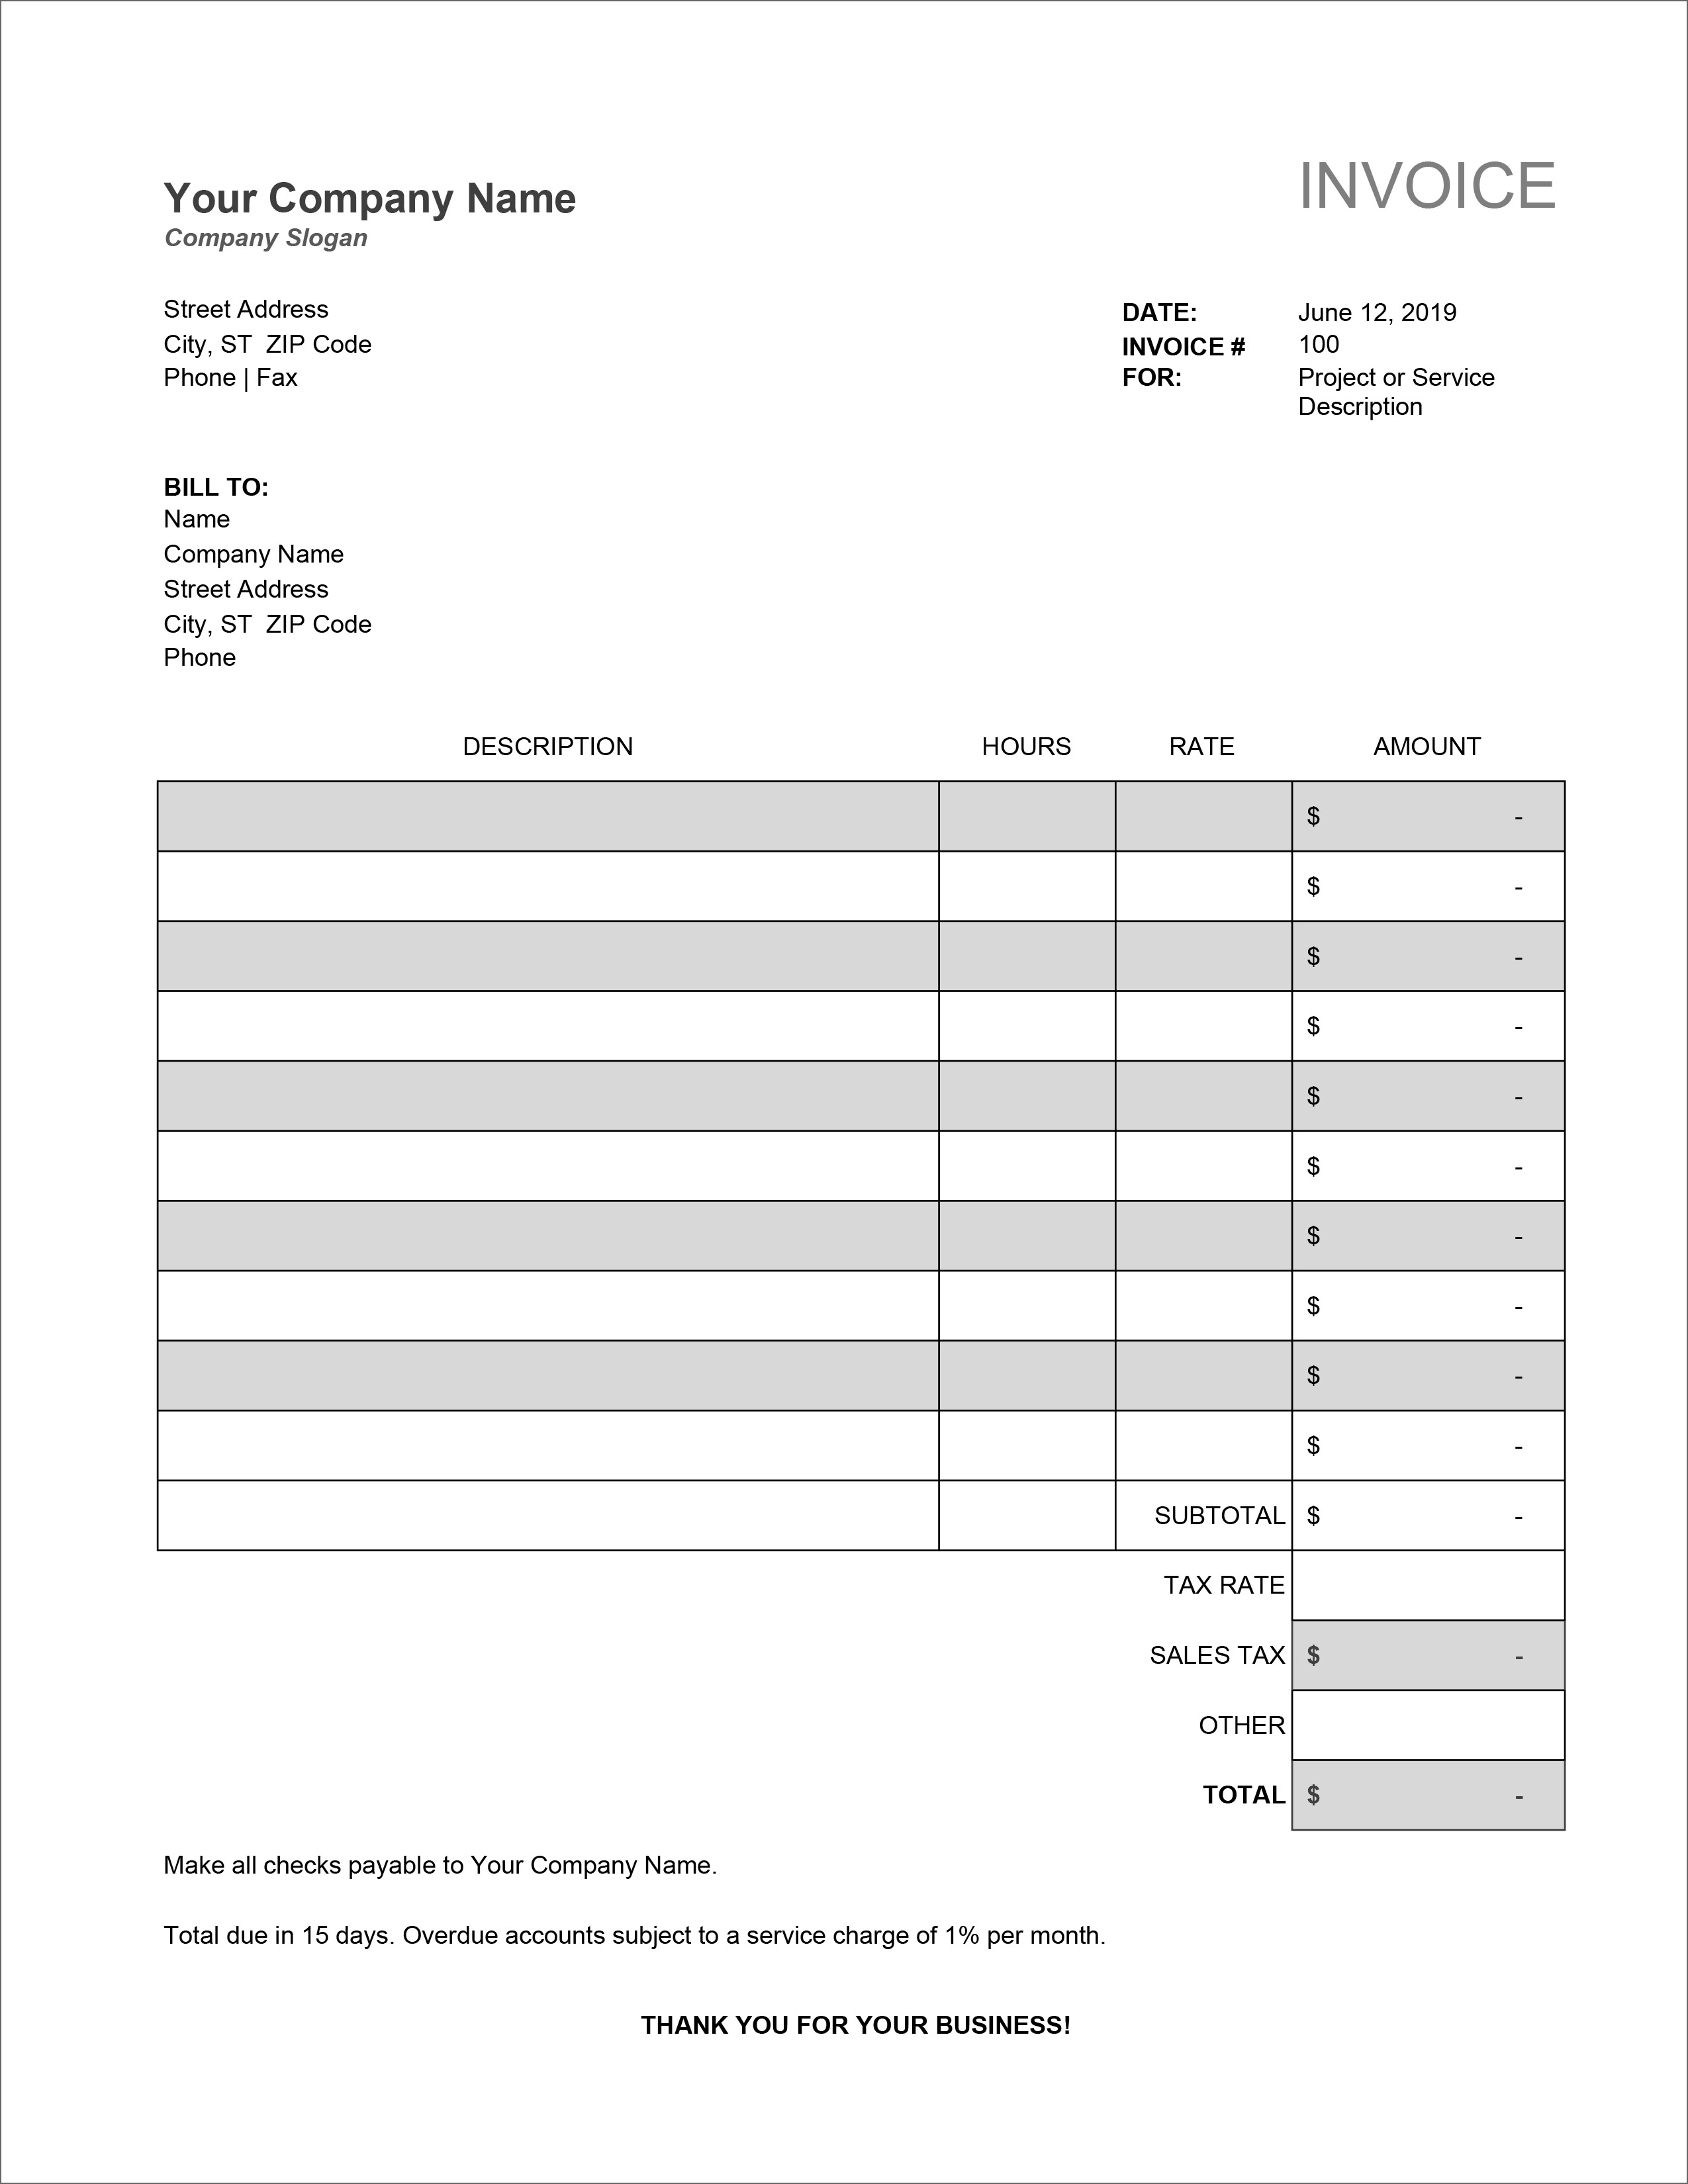 Microsoft Office Word Invoice Template